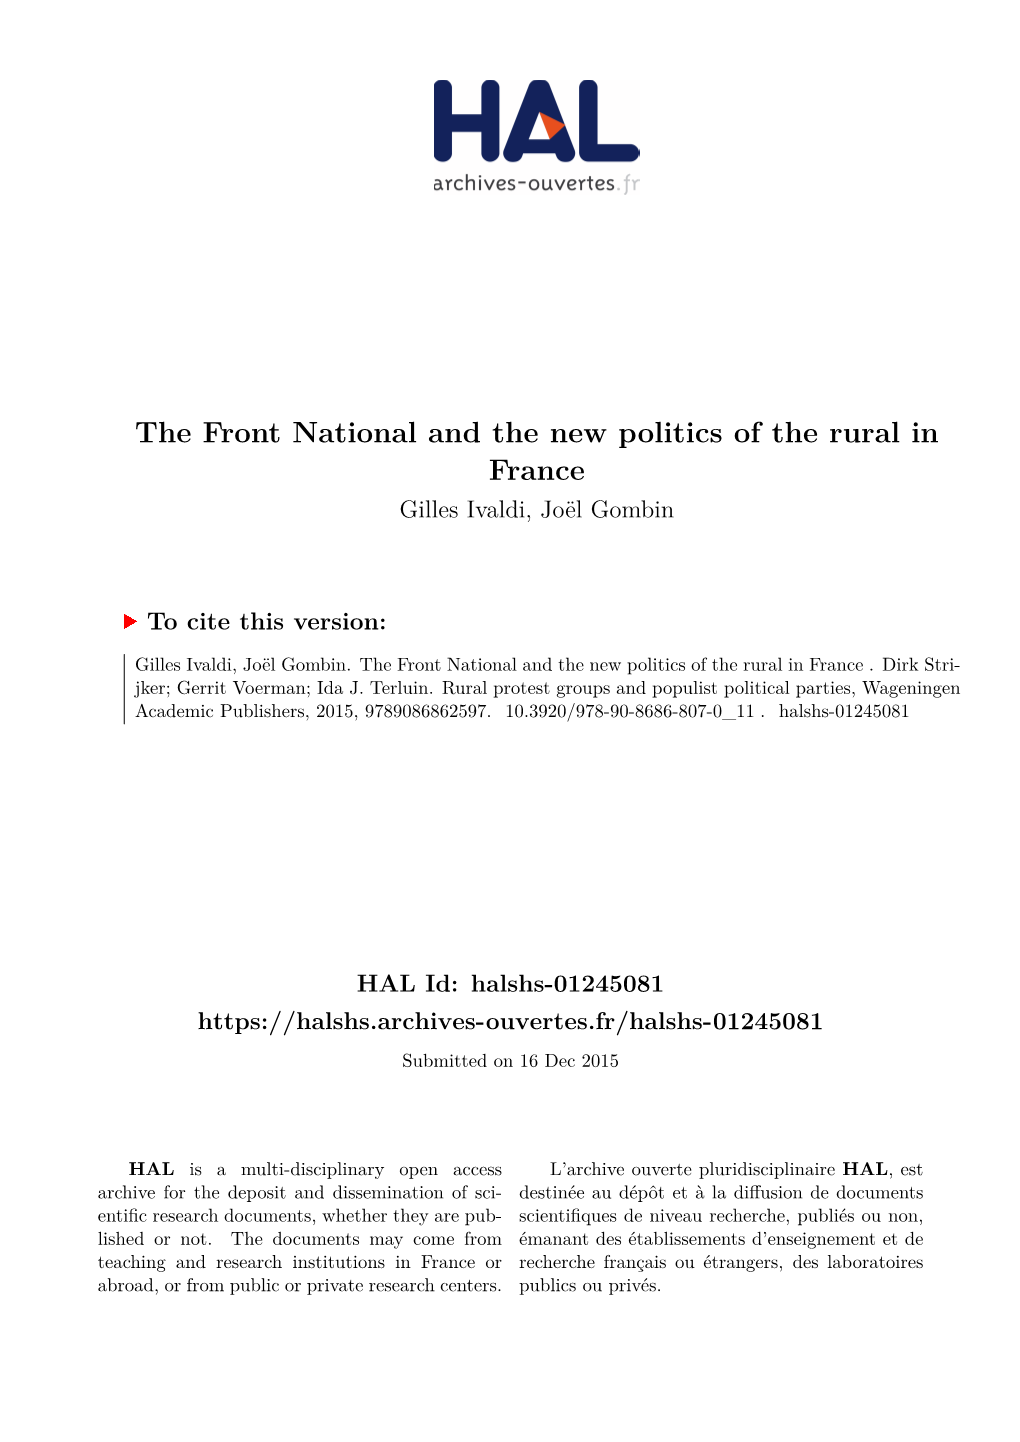 The Front National and the New Politics of the Rural in France Gilles Ivaldi, Joël Gombin